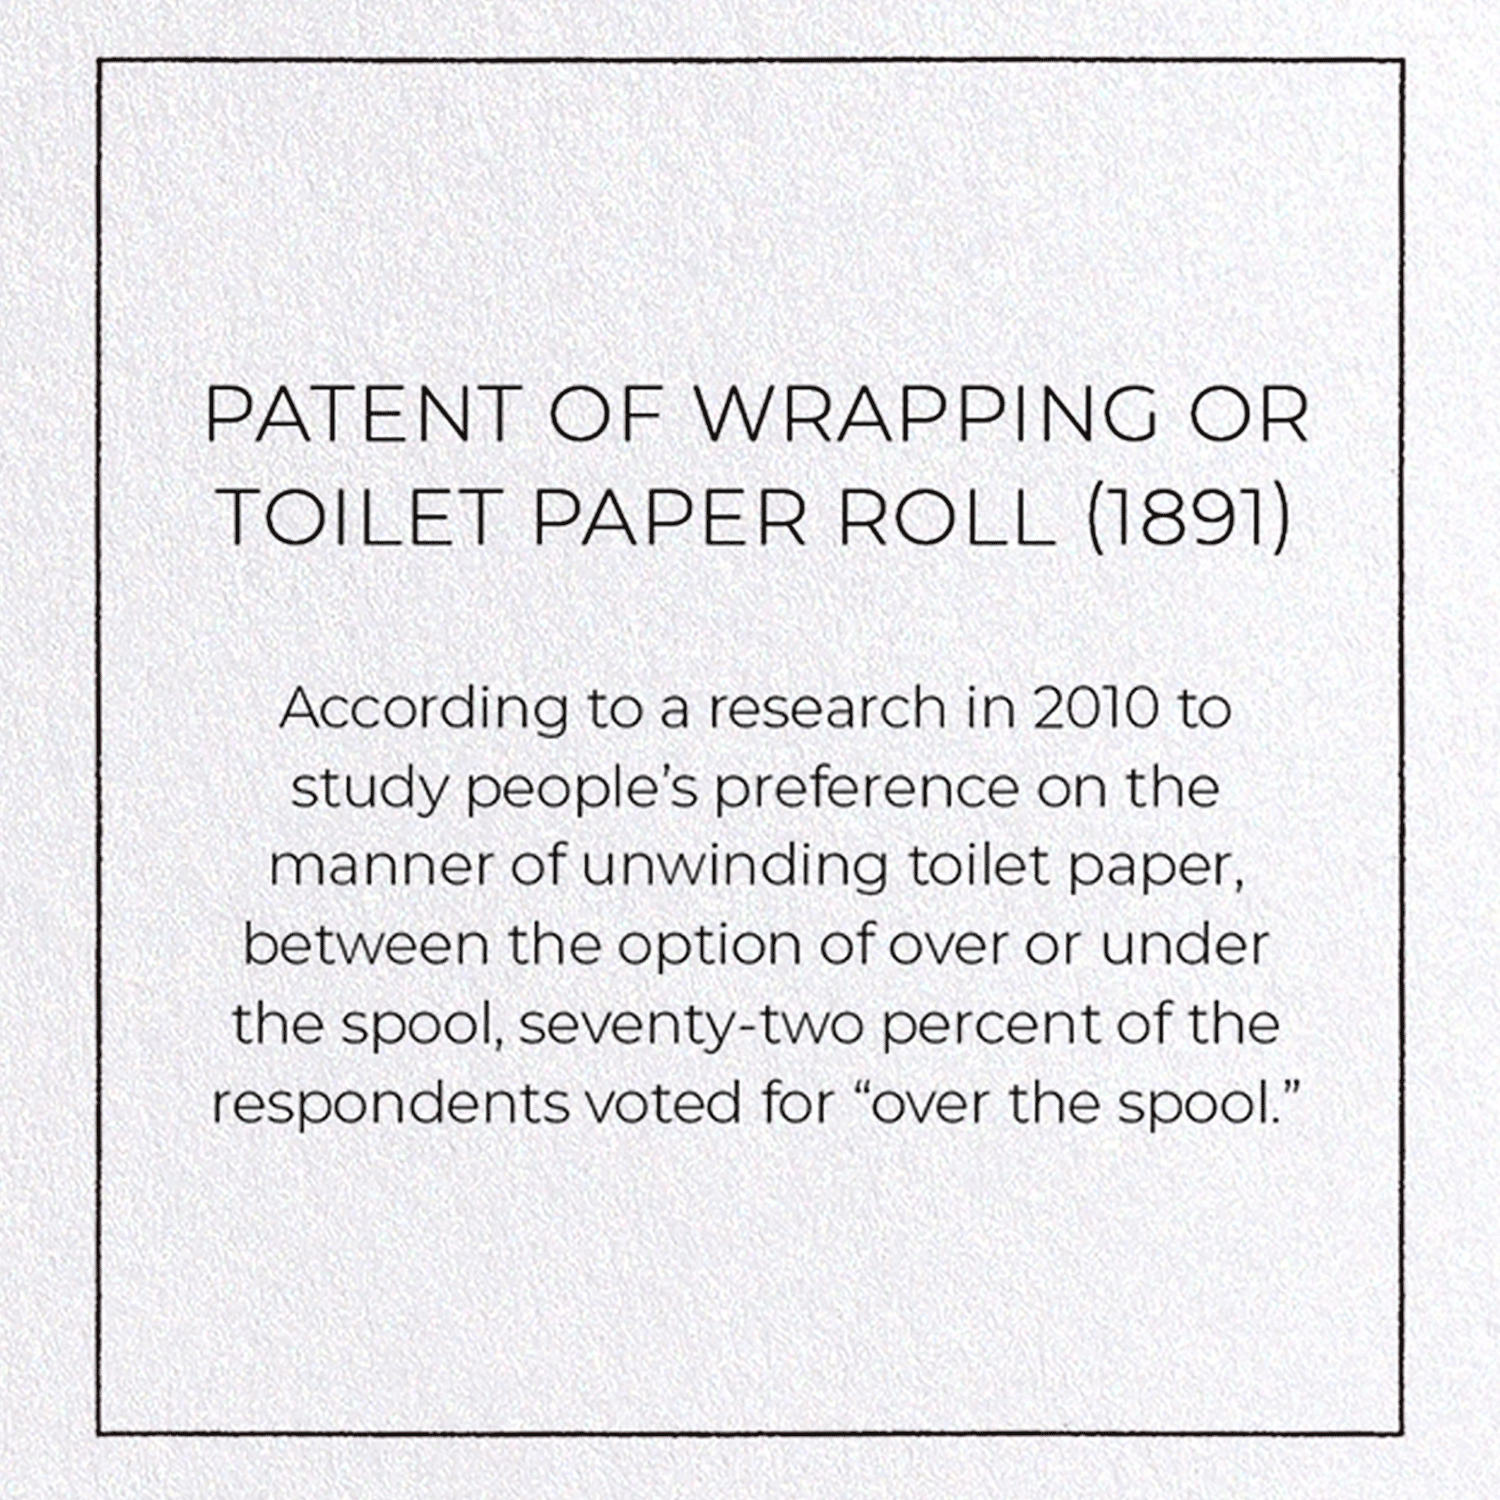 PATENT OF WRAPPING OR TOILET PAPER ROLL (1891)